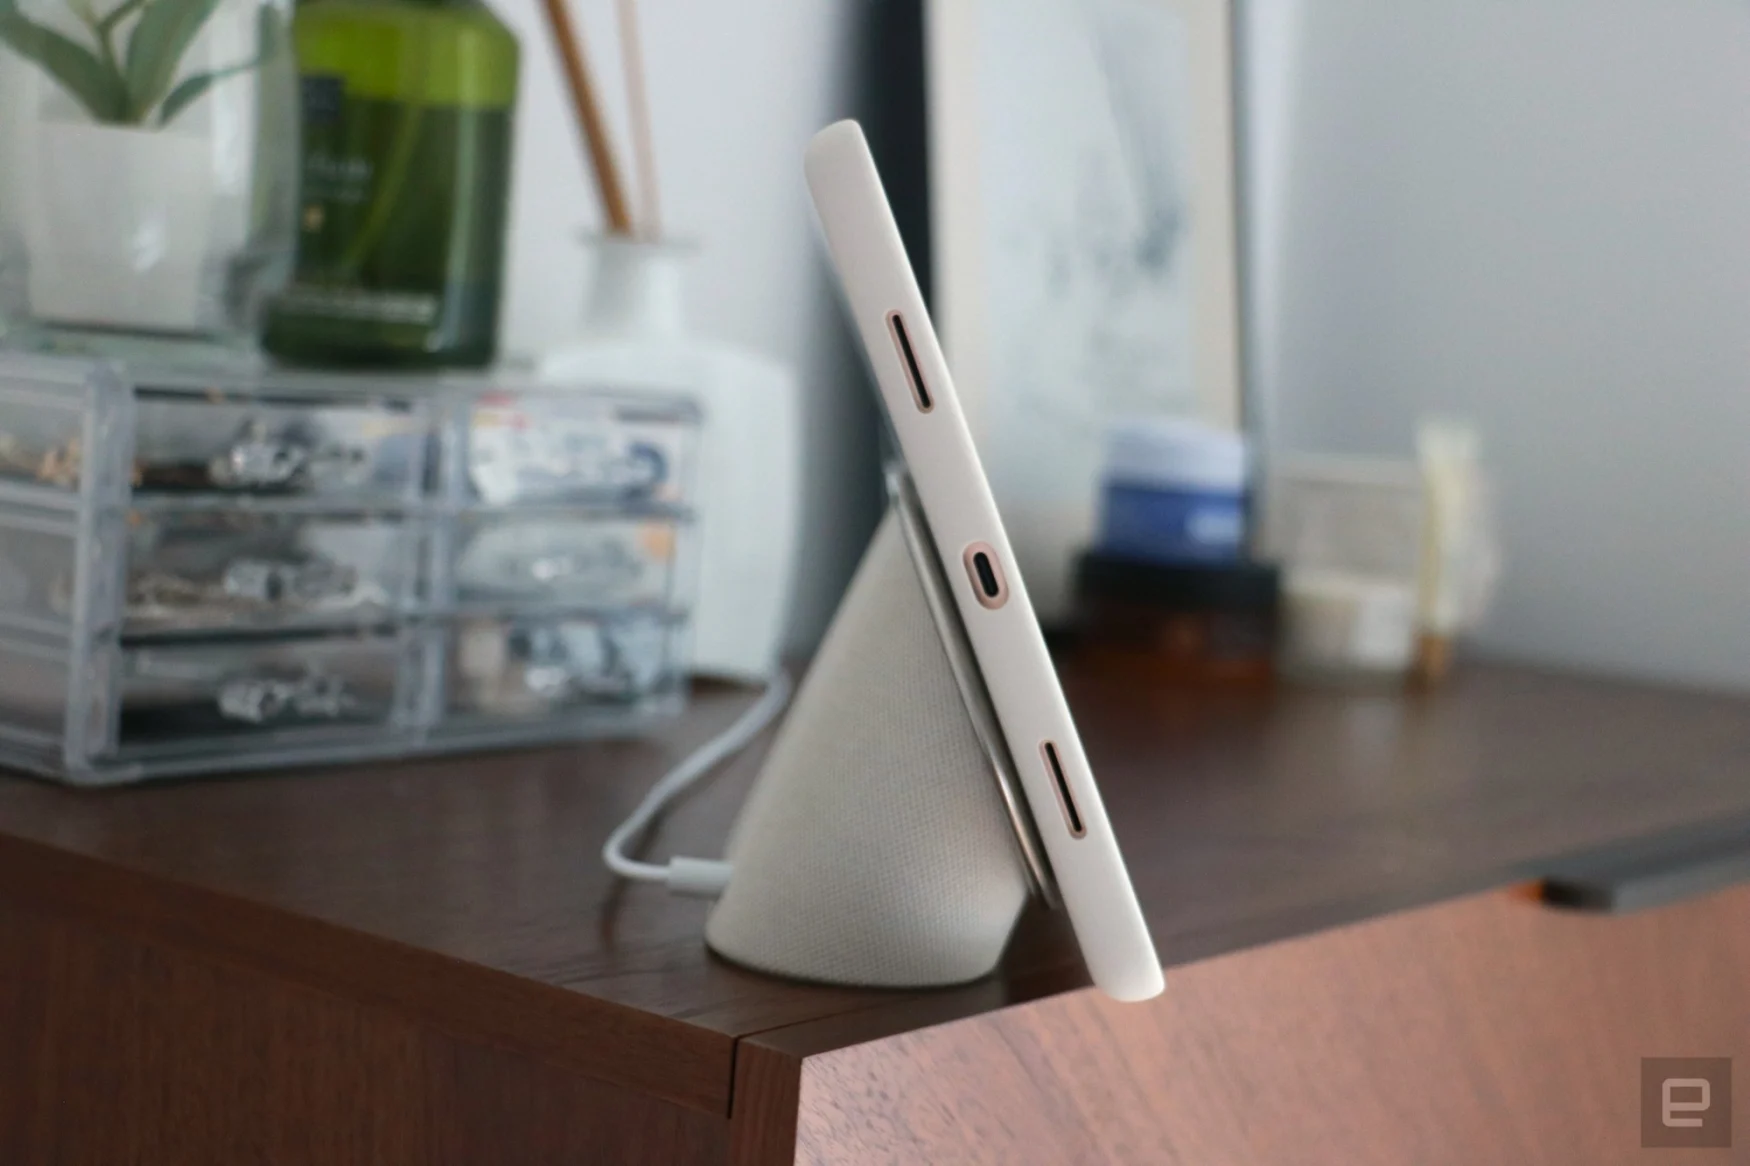 Side view of the Pixel Tablet on a walnut dresser, showing the USB-C port on its left edge. It's docked on the speaker base, with its protective case on.